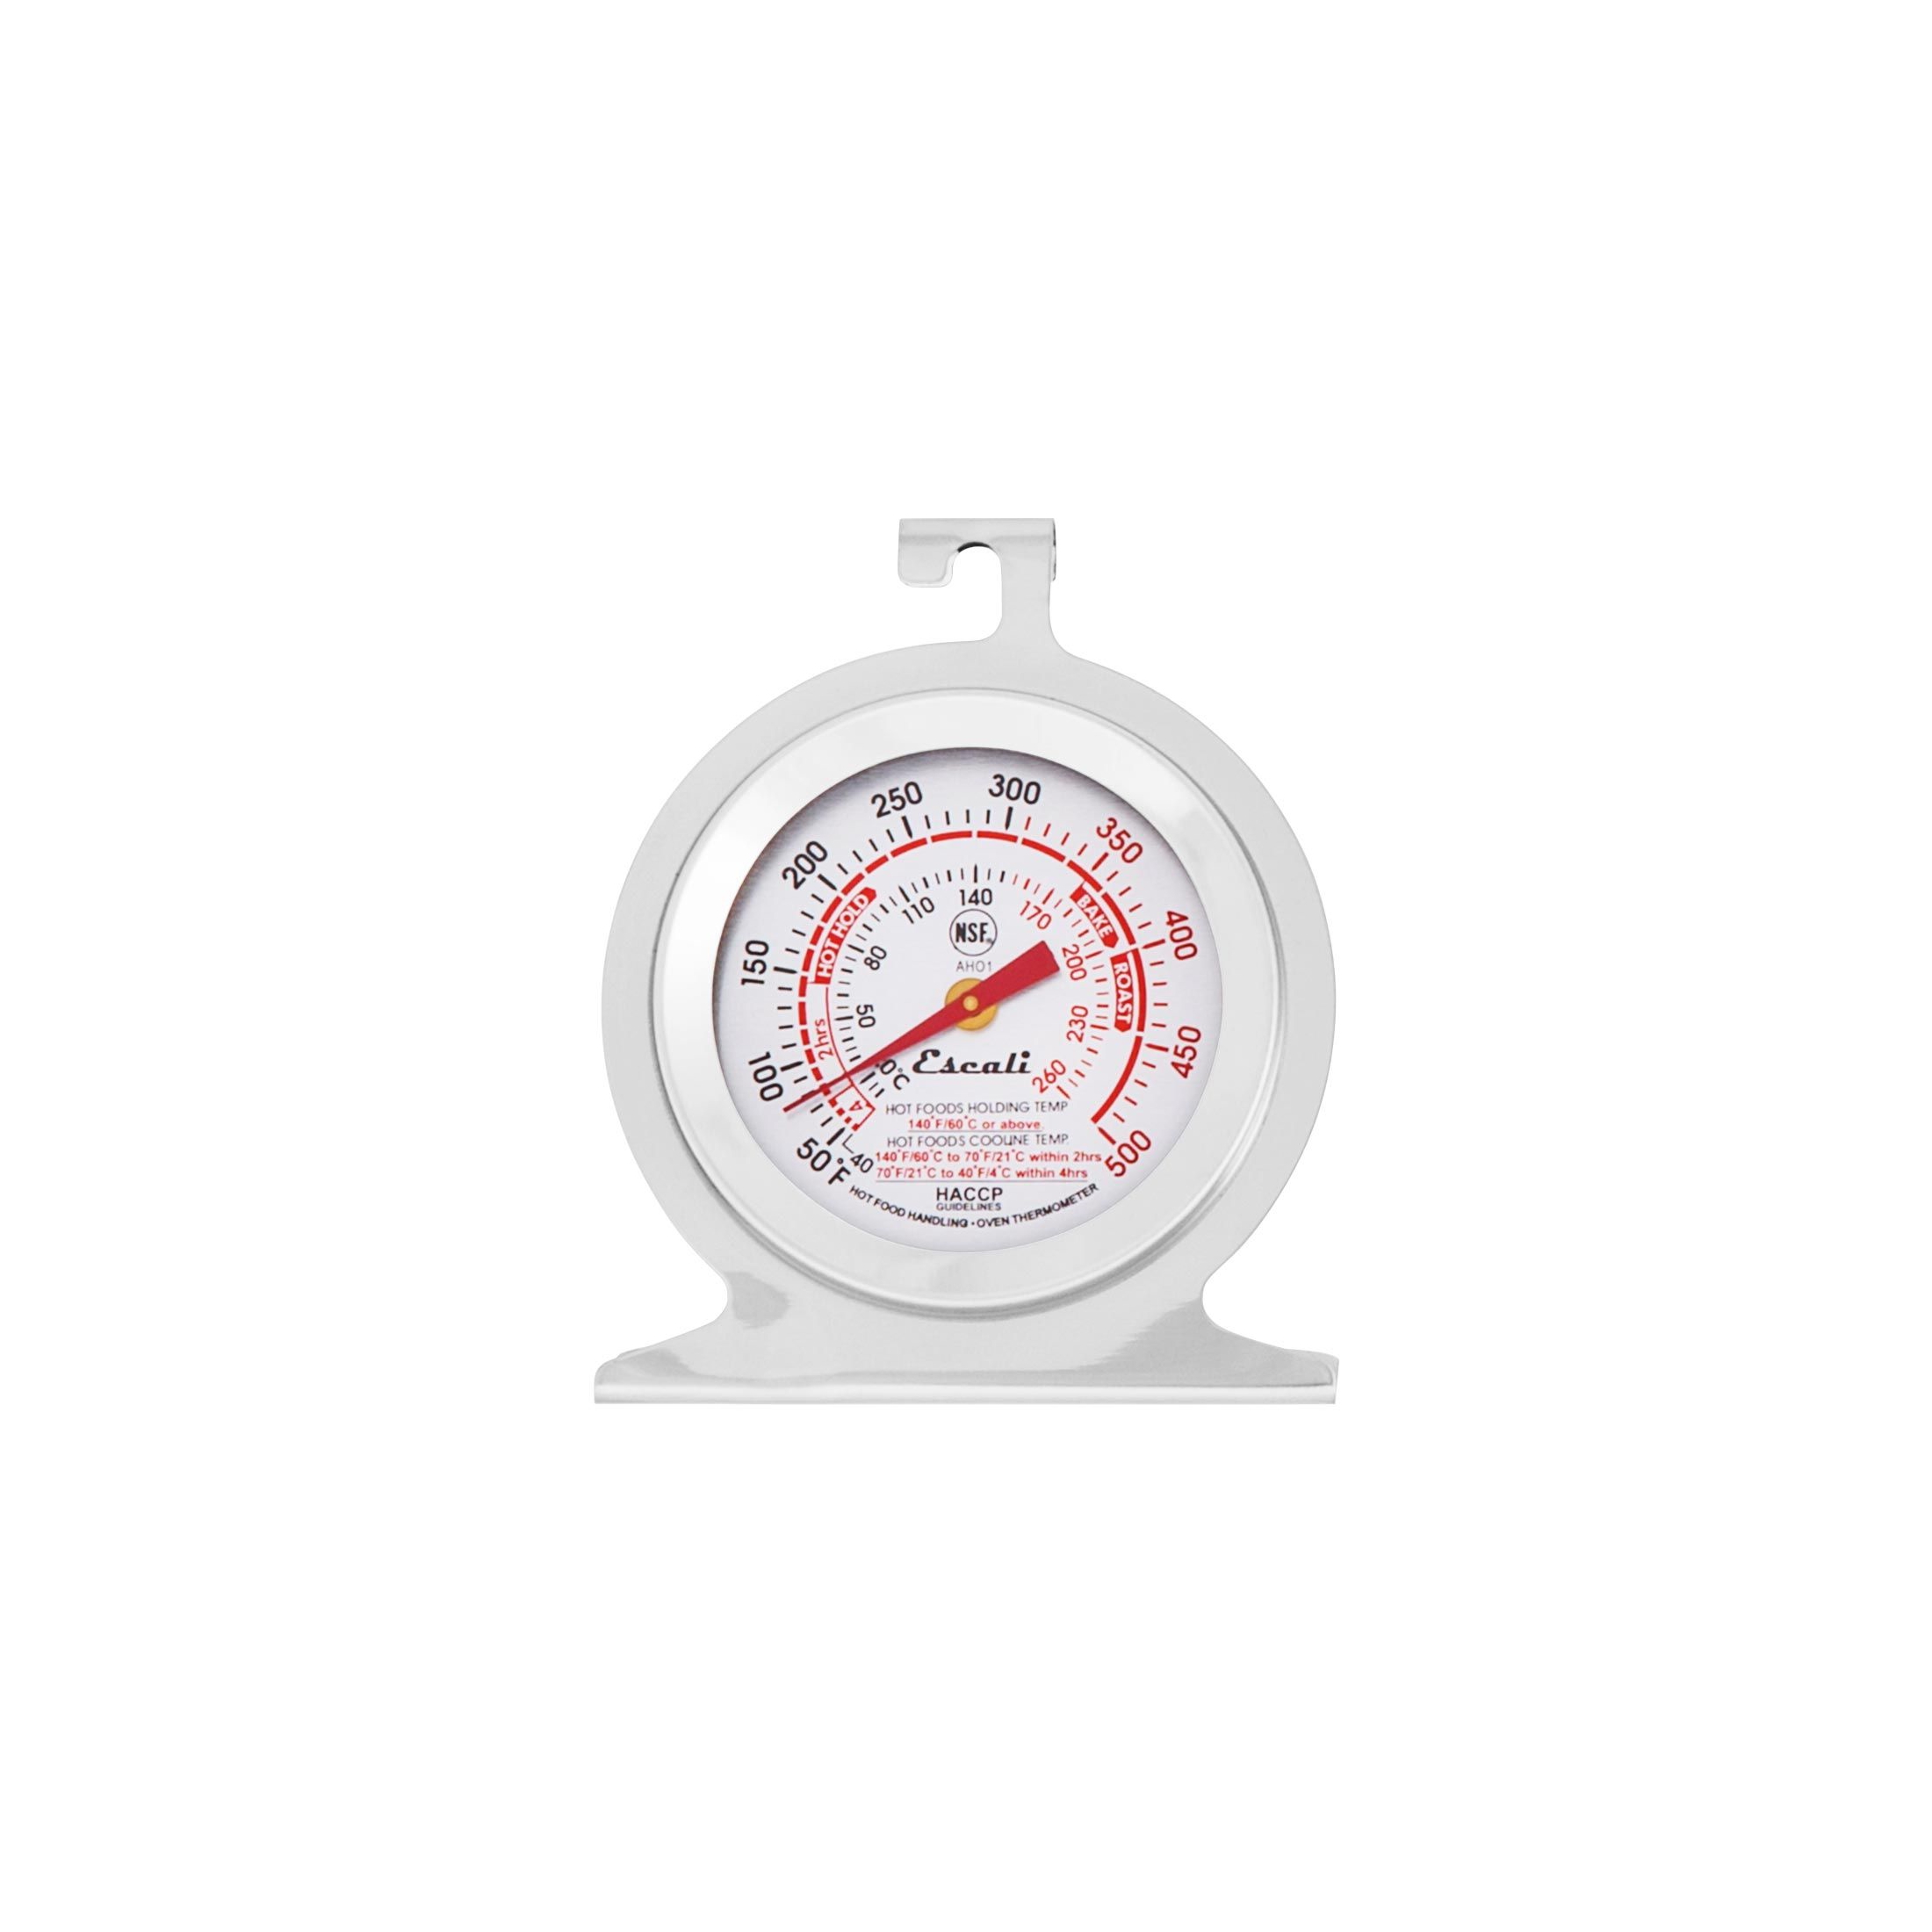 https://www.berings.com/wp-content/uploads/2021/03/Escali-AHO1-Oven-Thermometer.jpg